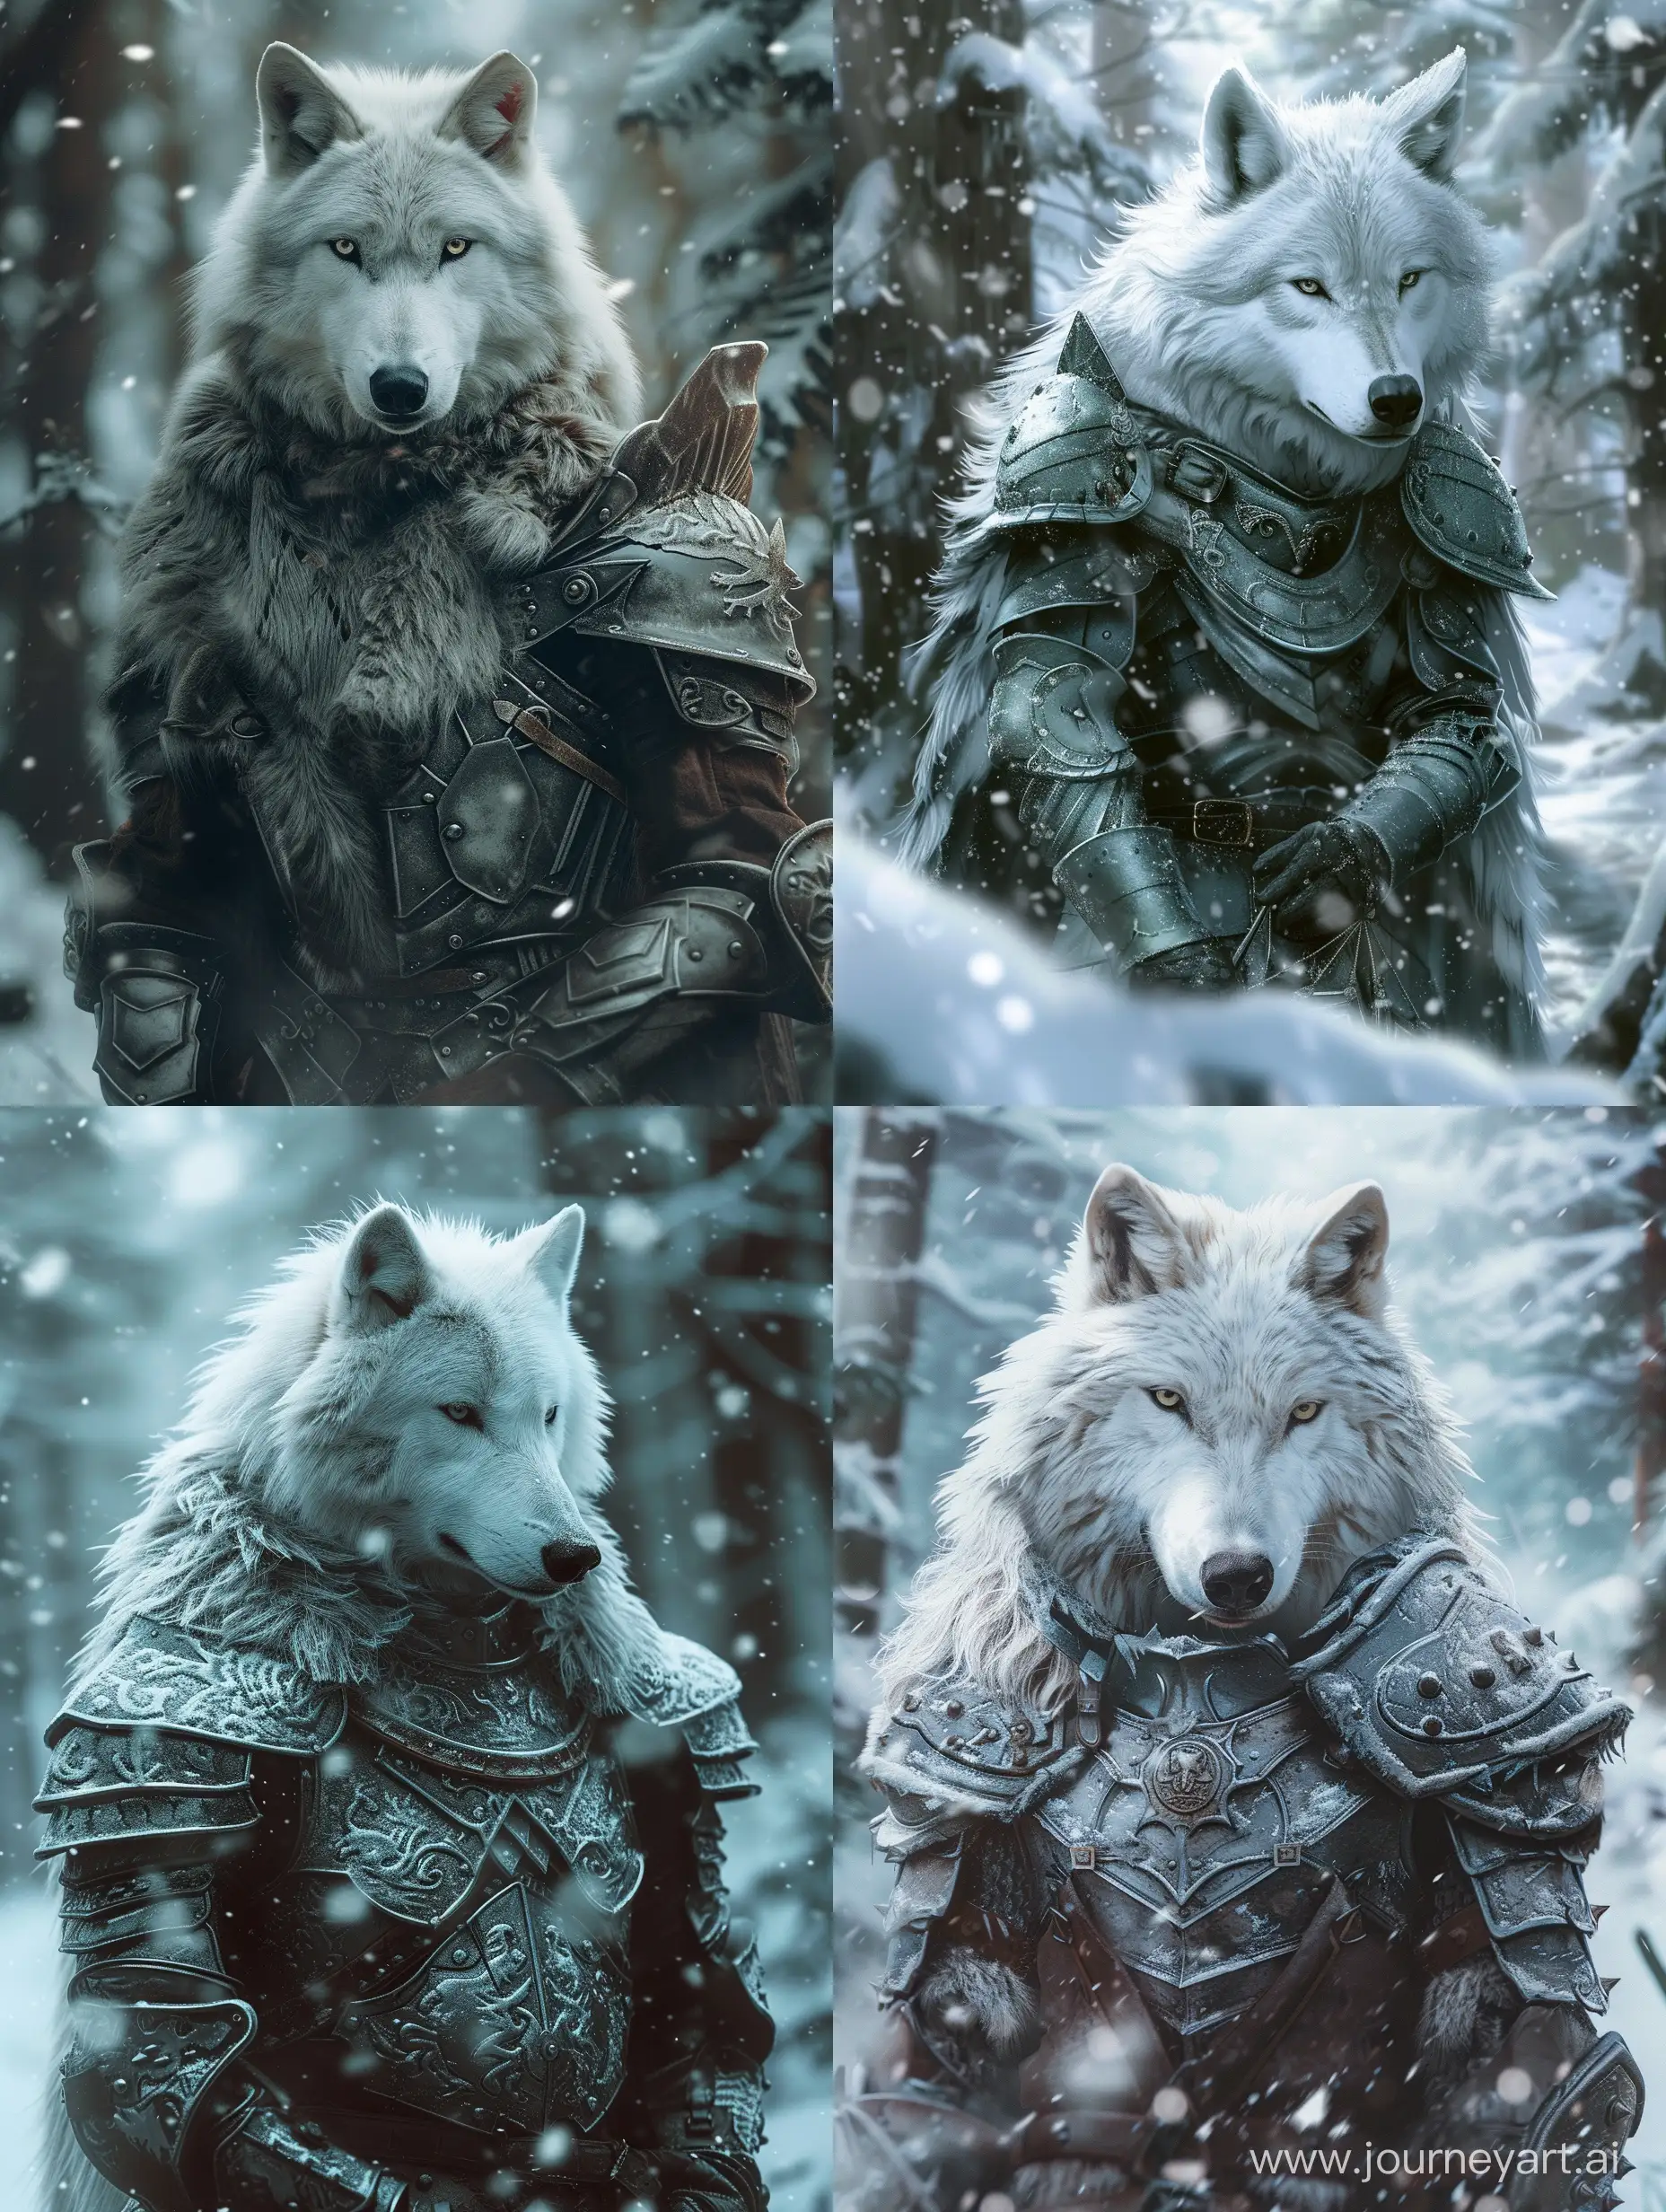 A white wolf dressed in armor stands in a snowy forest.